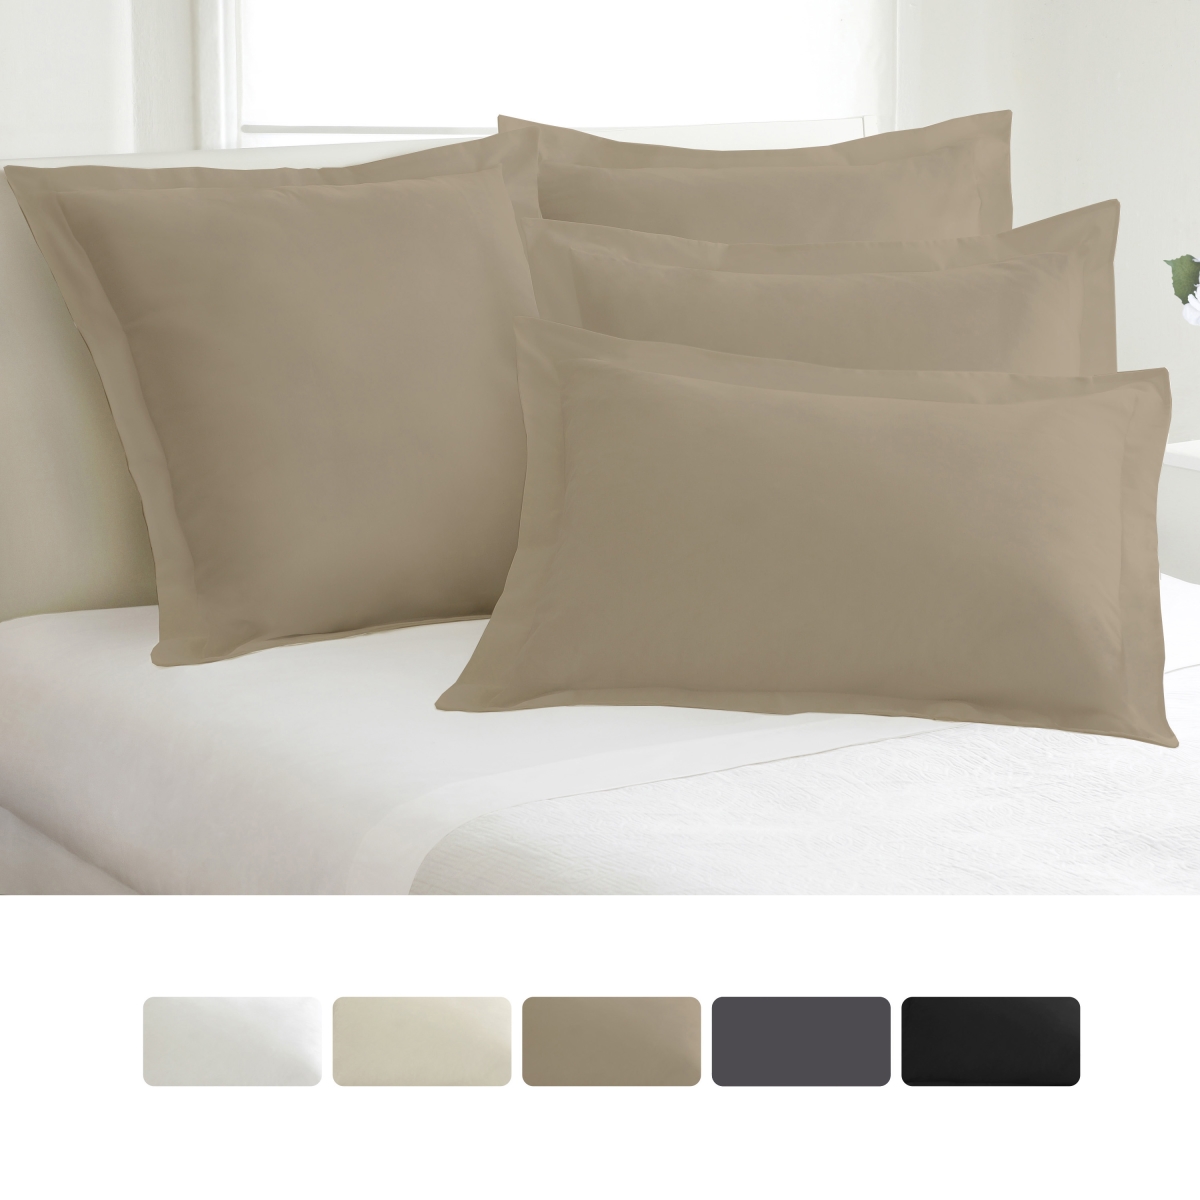 Toh24902moch07 Levinsohn Basic Cotton Rich Tailored Sham With 2 In. Flange Mocha - Standard - Pack Of 2